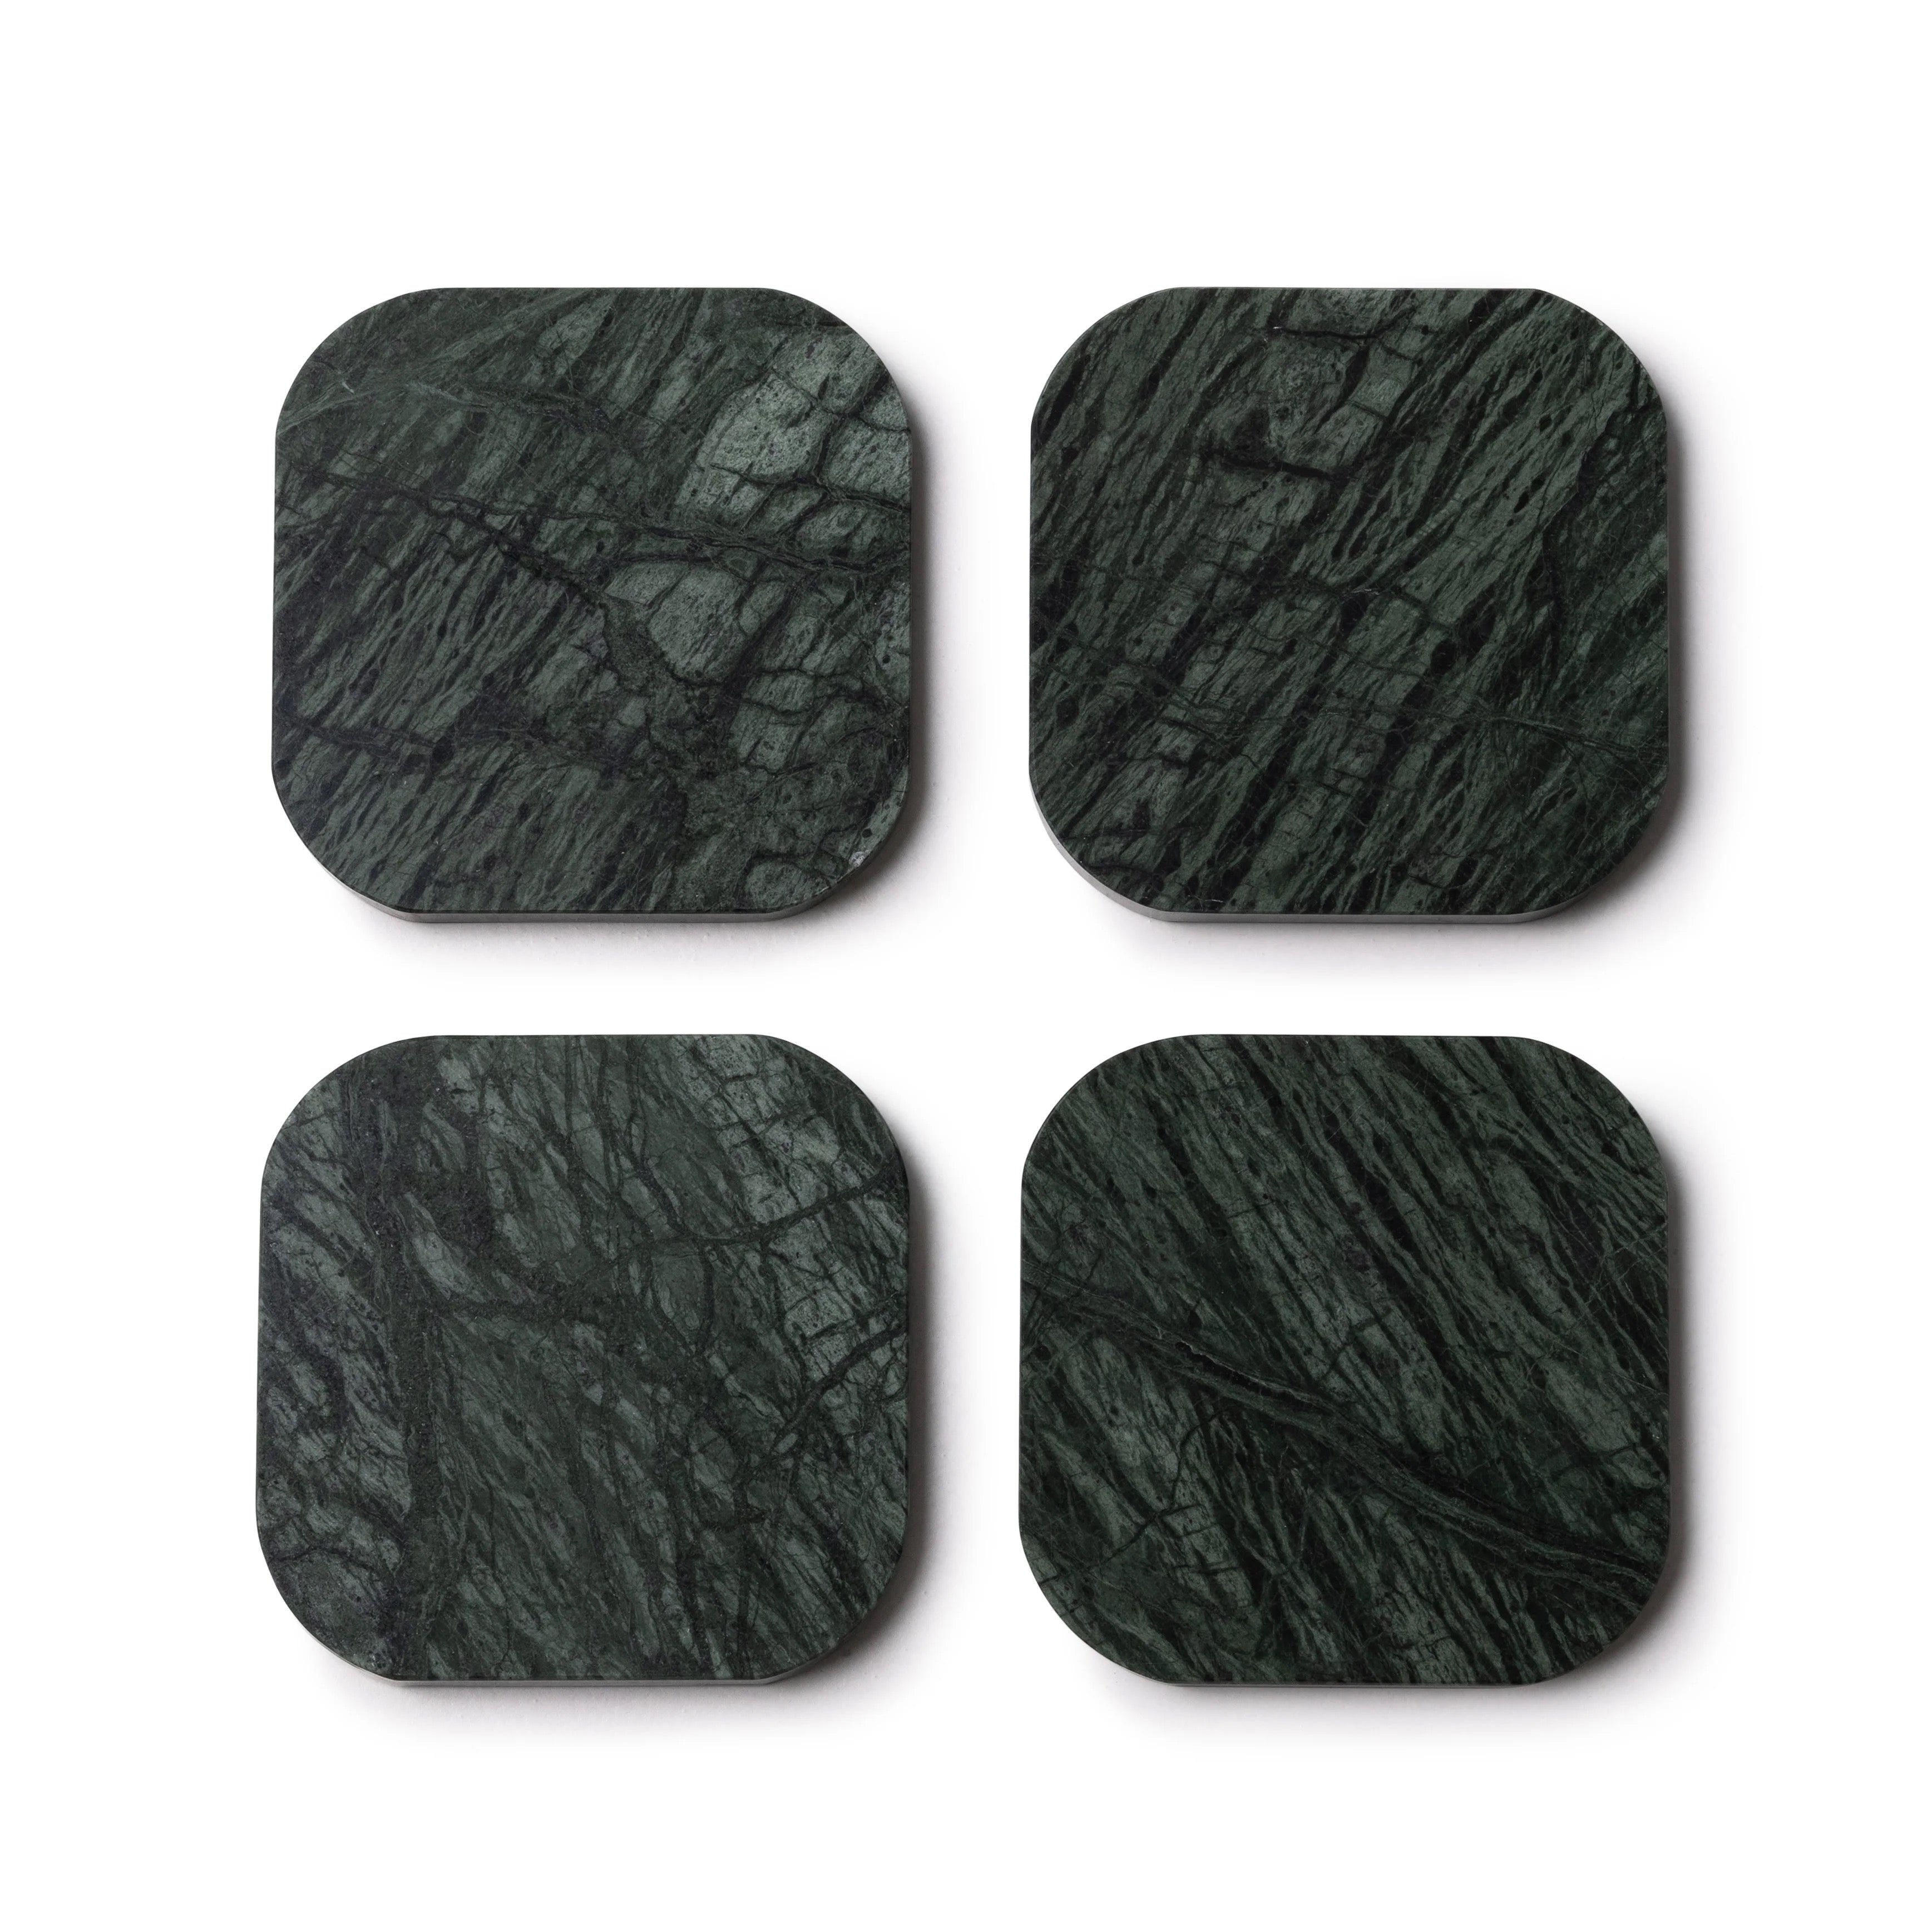 Glass coasters in green marble - set of 4